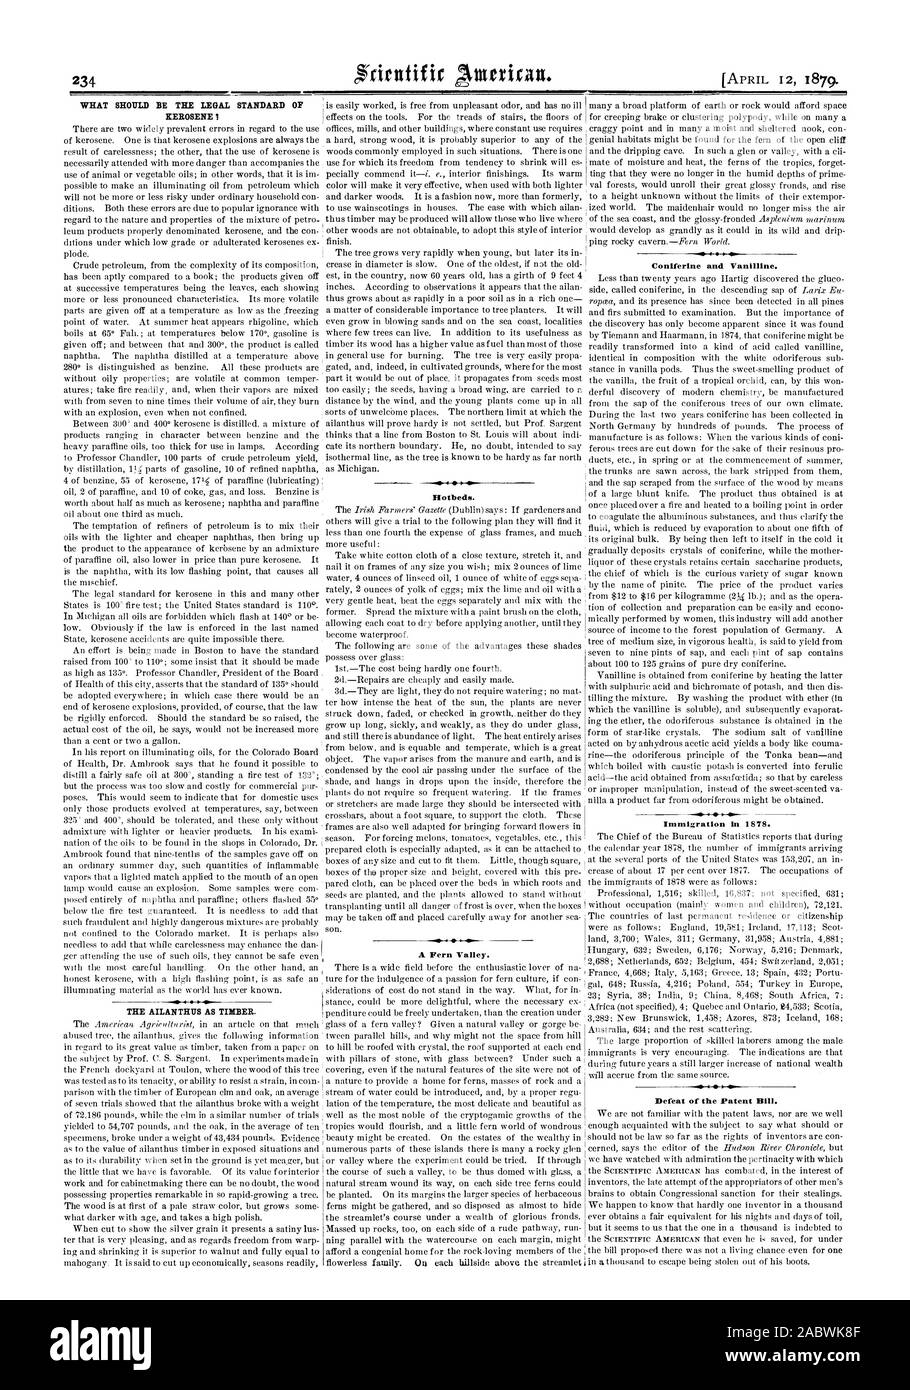 WHAT SHOULD BE THE LEGAL STANDARD OF KEROSENE  0 THE AILANTHUS AS TIMBER. A Fern Valley. Coniferine and Vanilline. Immigration in 1878. Defeat of the Patent Bill. Botibeds., scientific american, 1879-04-11 Stock Photo